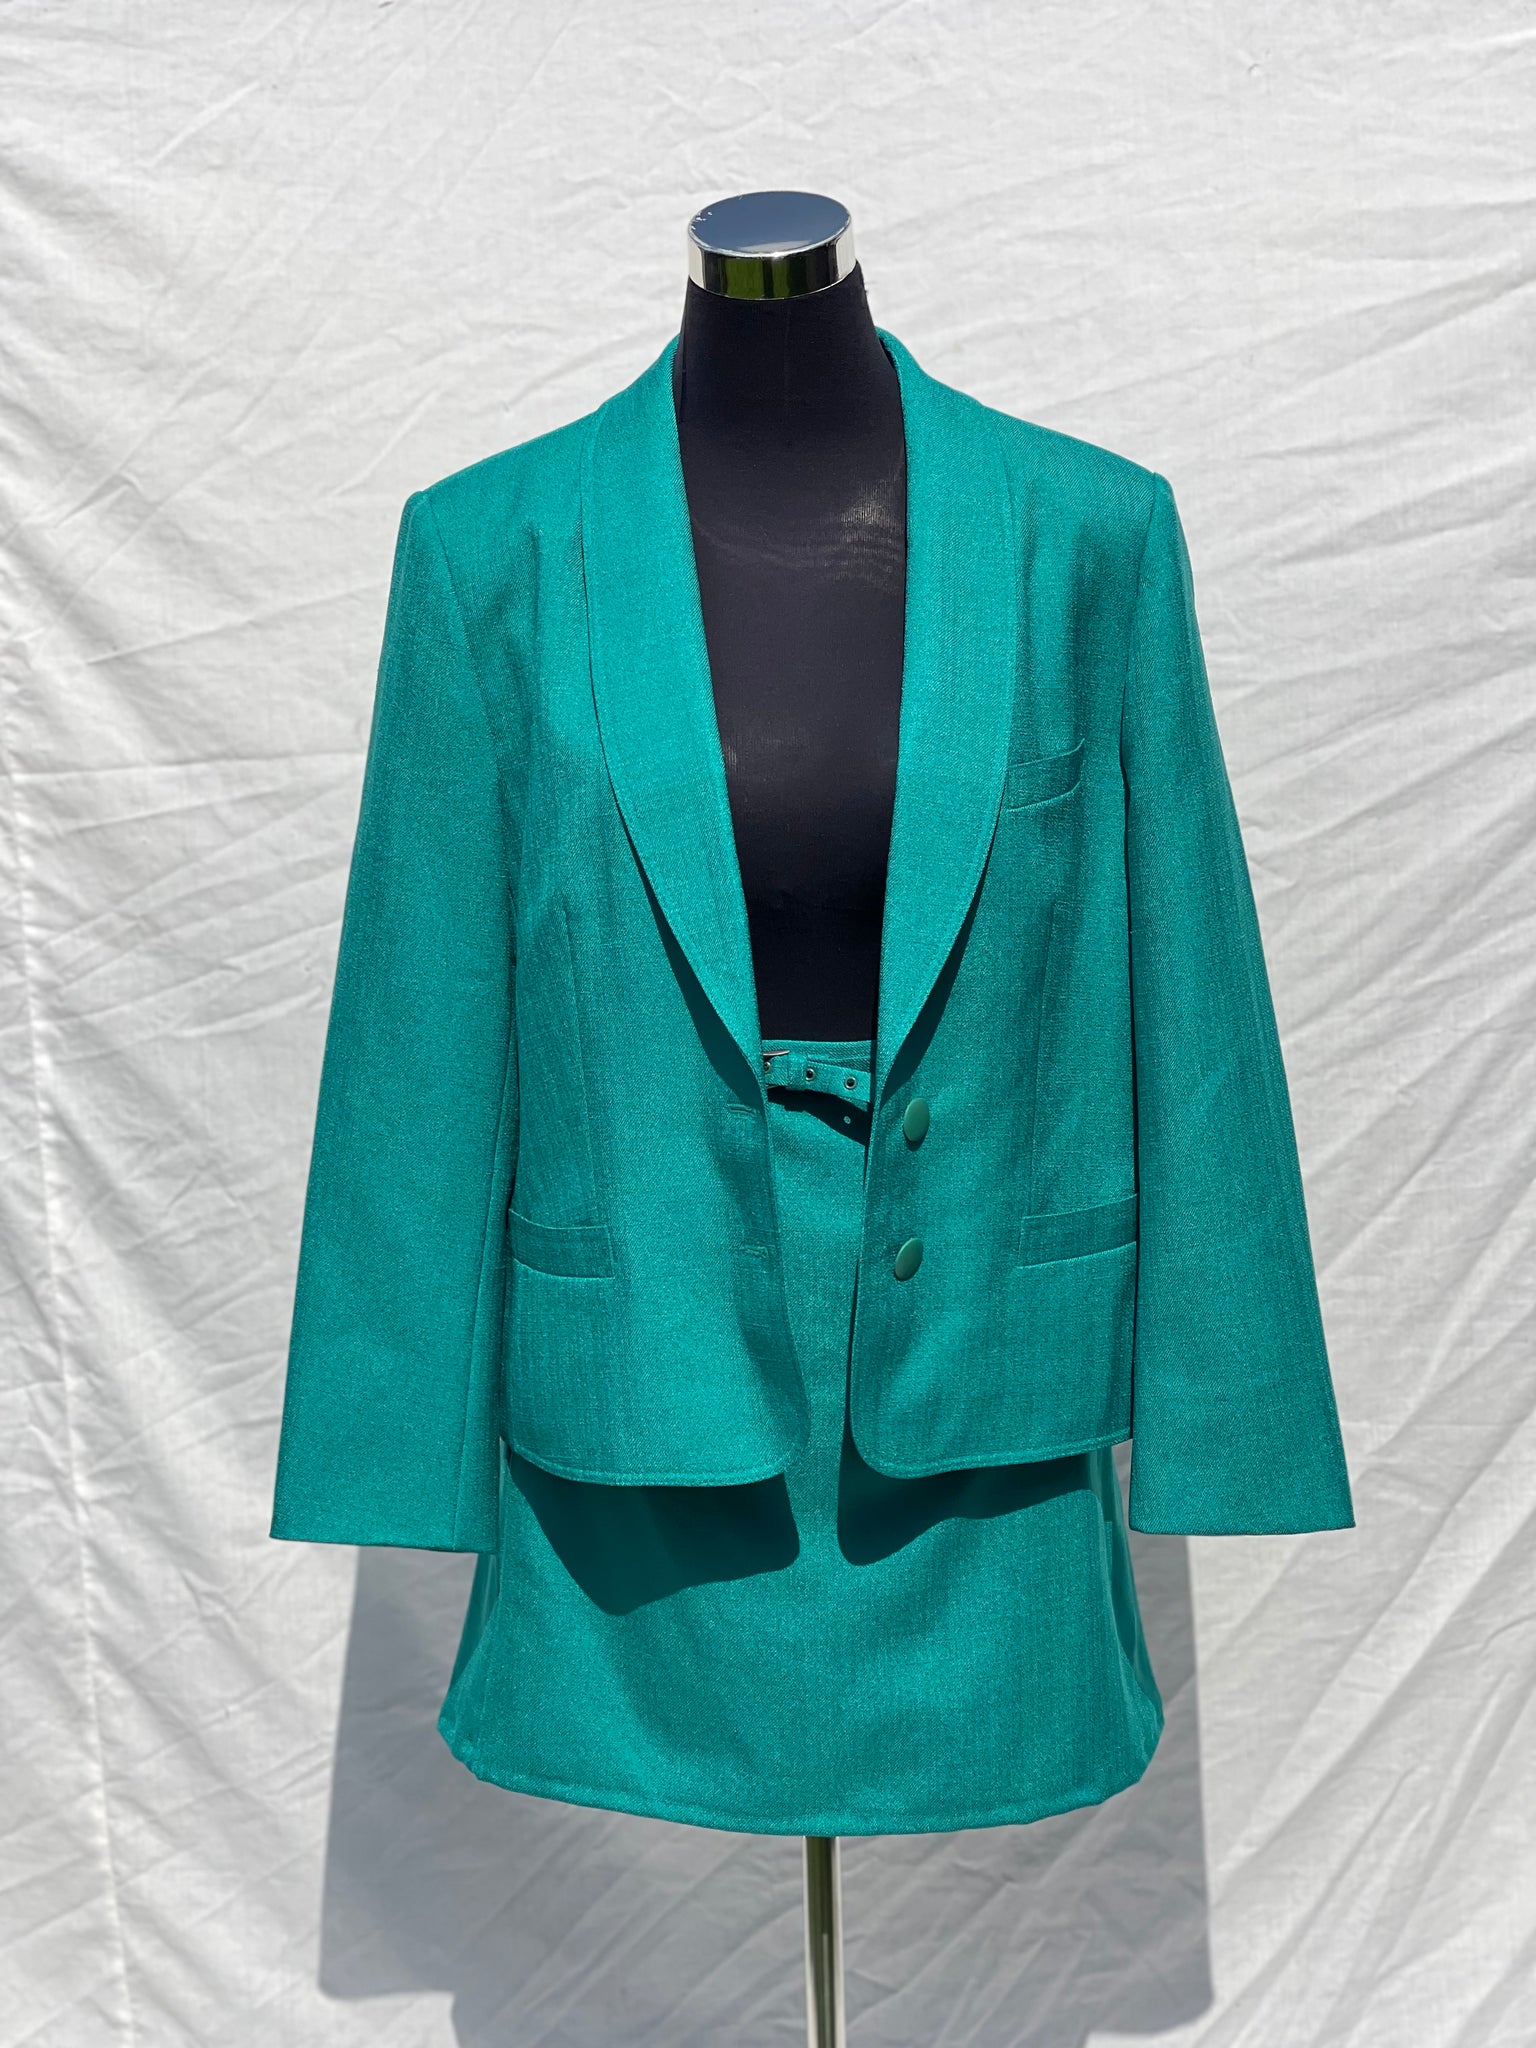 Vintage Skirt Suit  (36) (Just pay shipping)